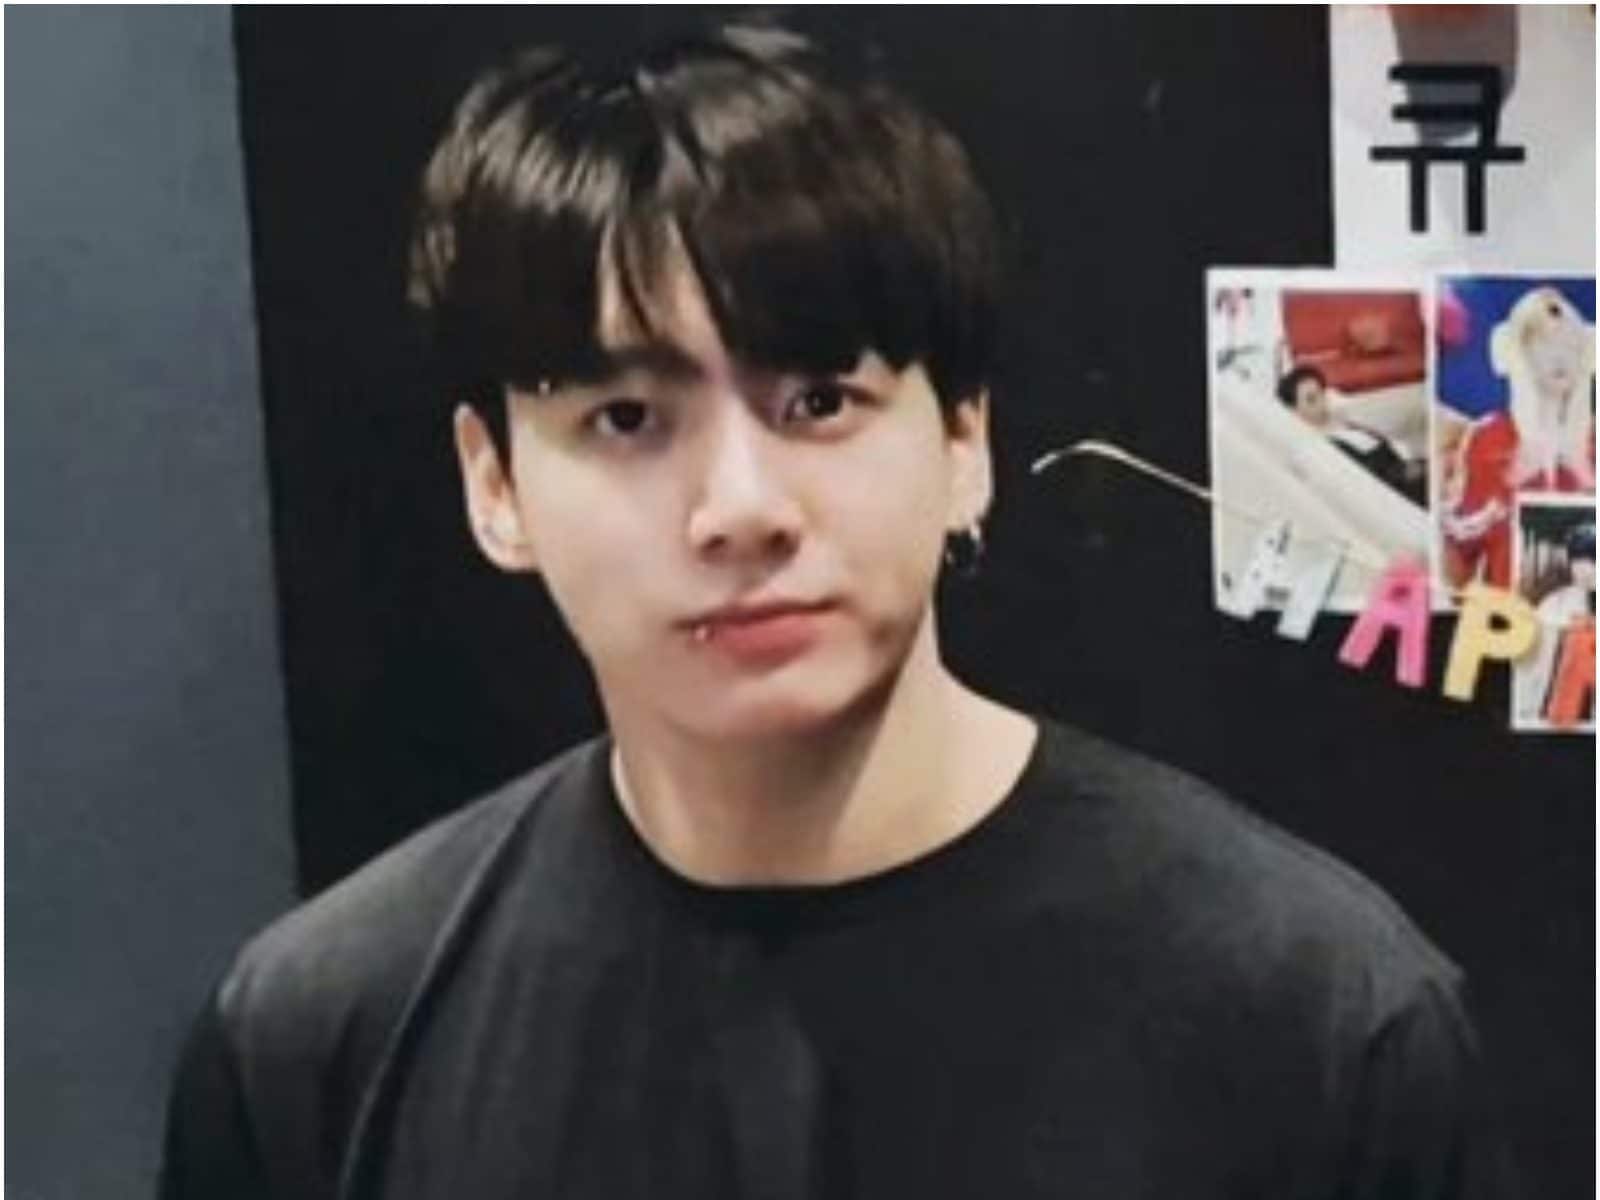 BTS' Jungkook reacts strongly to fans following him to gym: 'I'm a human  too' - Hindustan Times